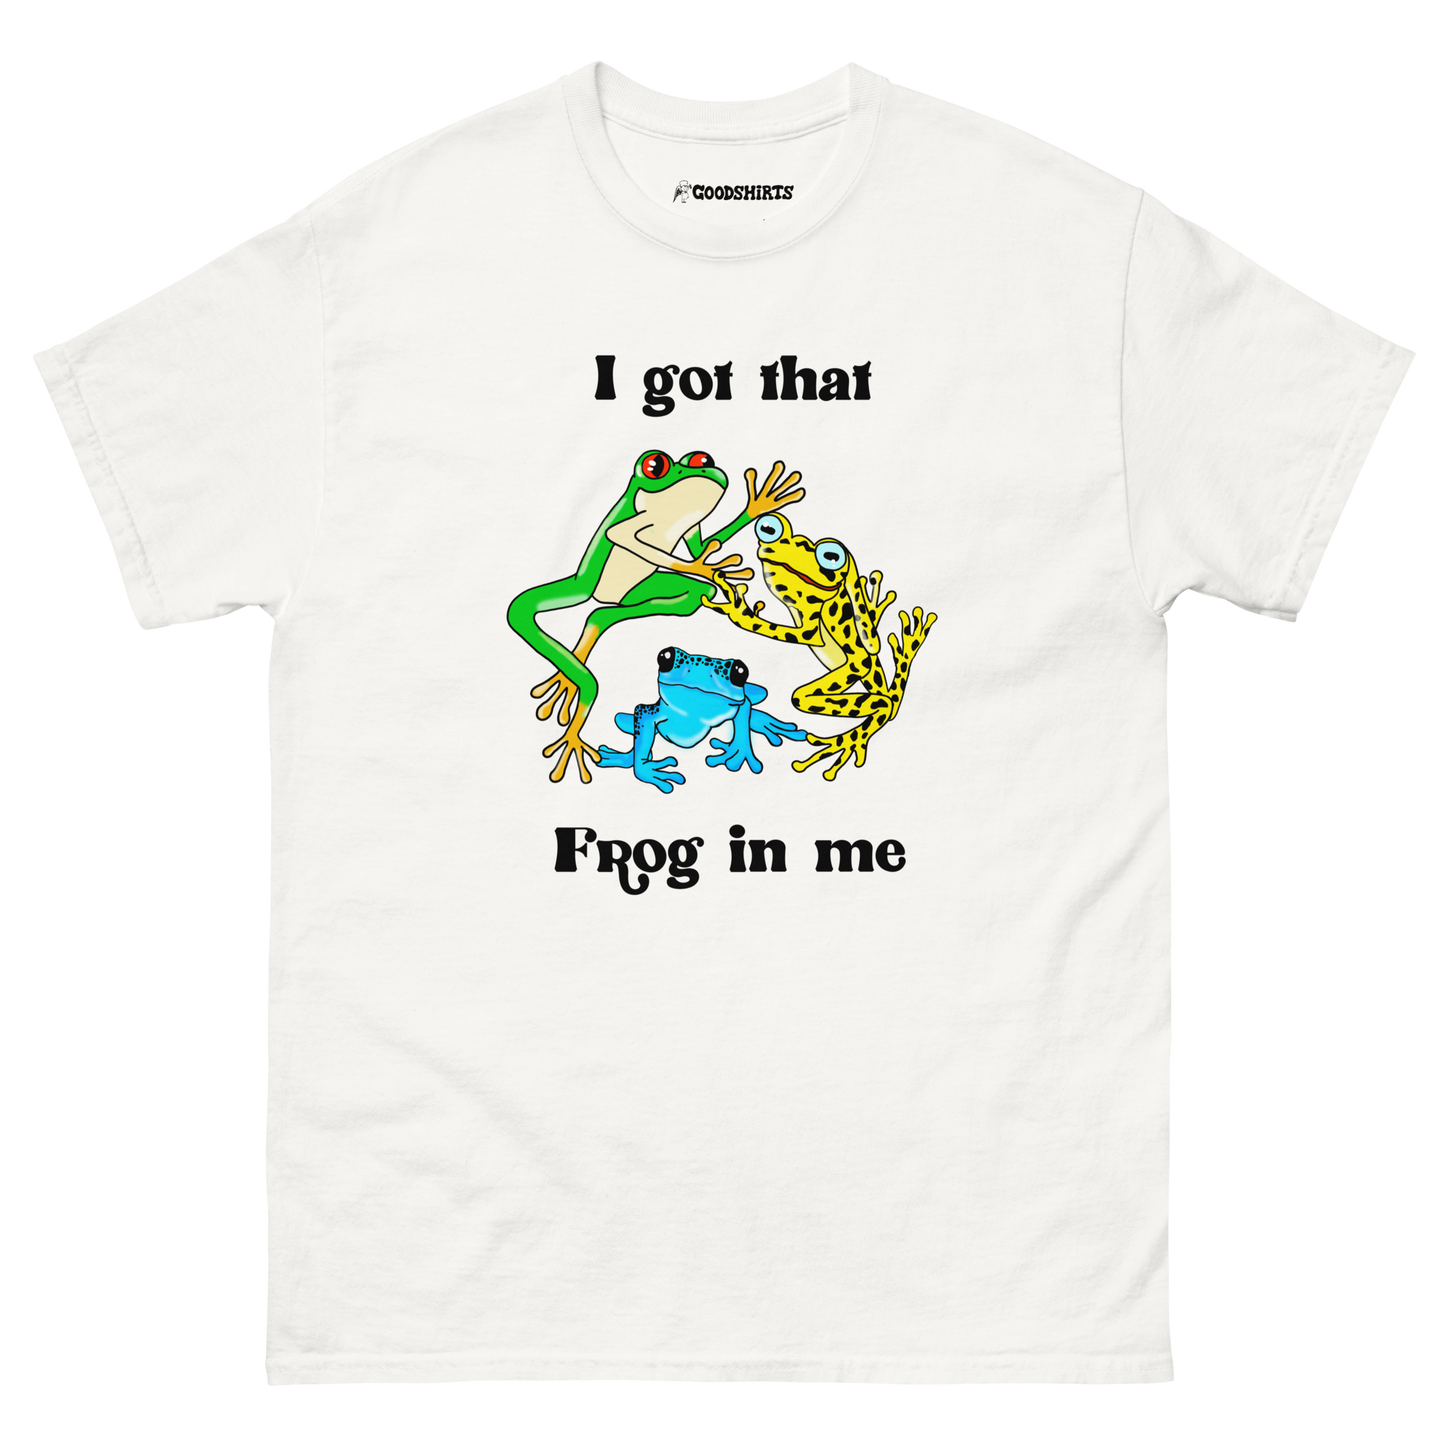 I Got That Frog In Me.